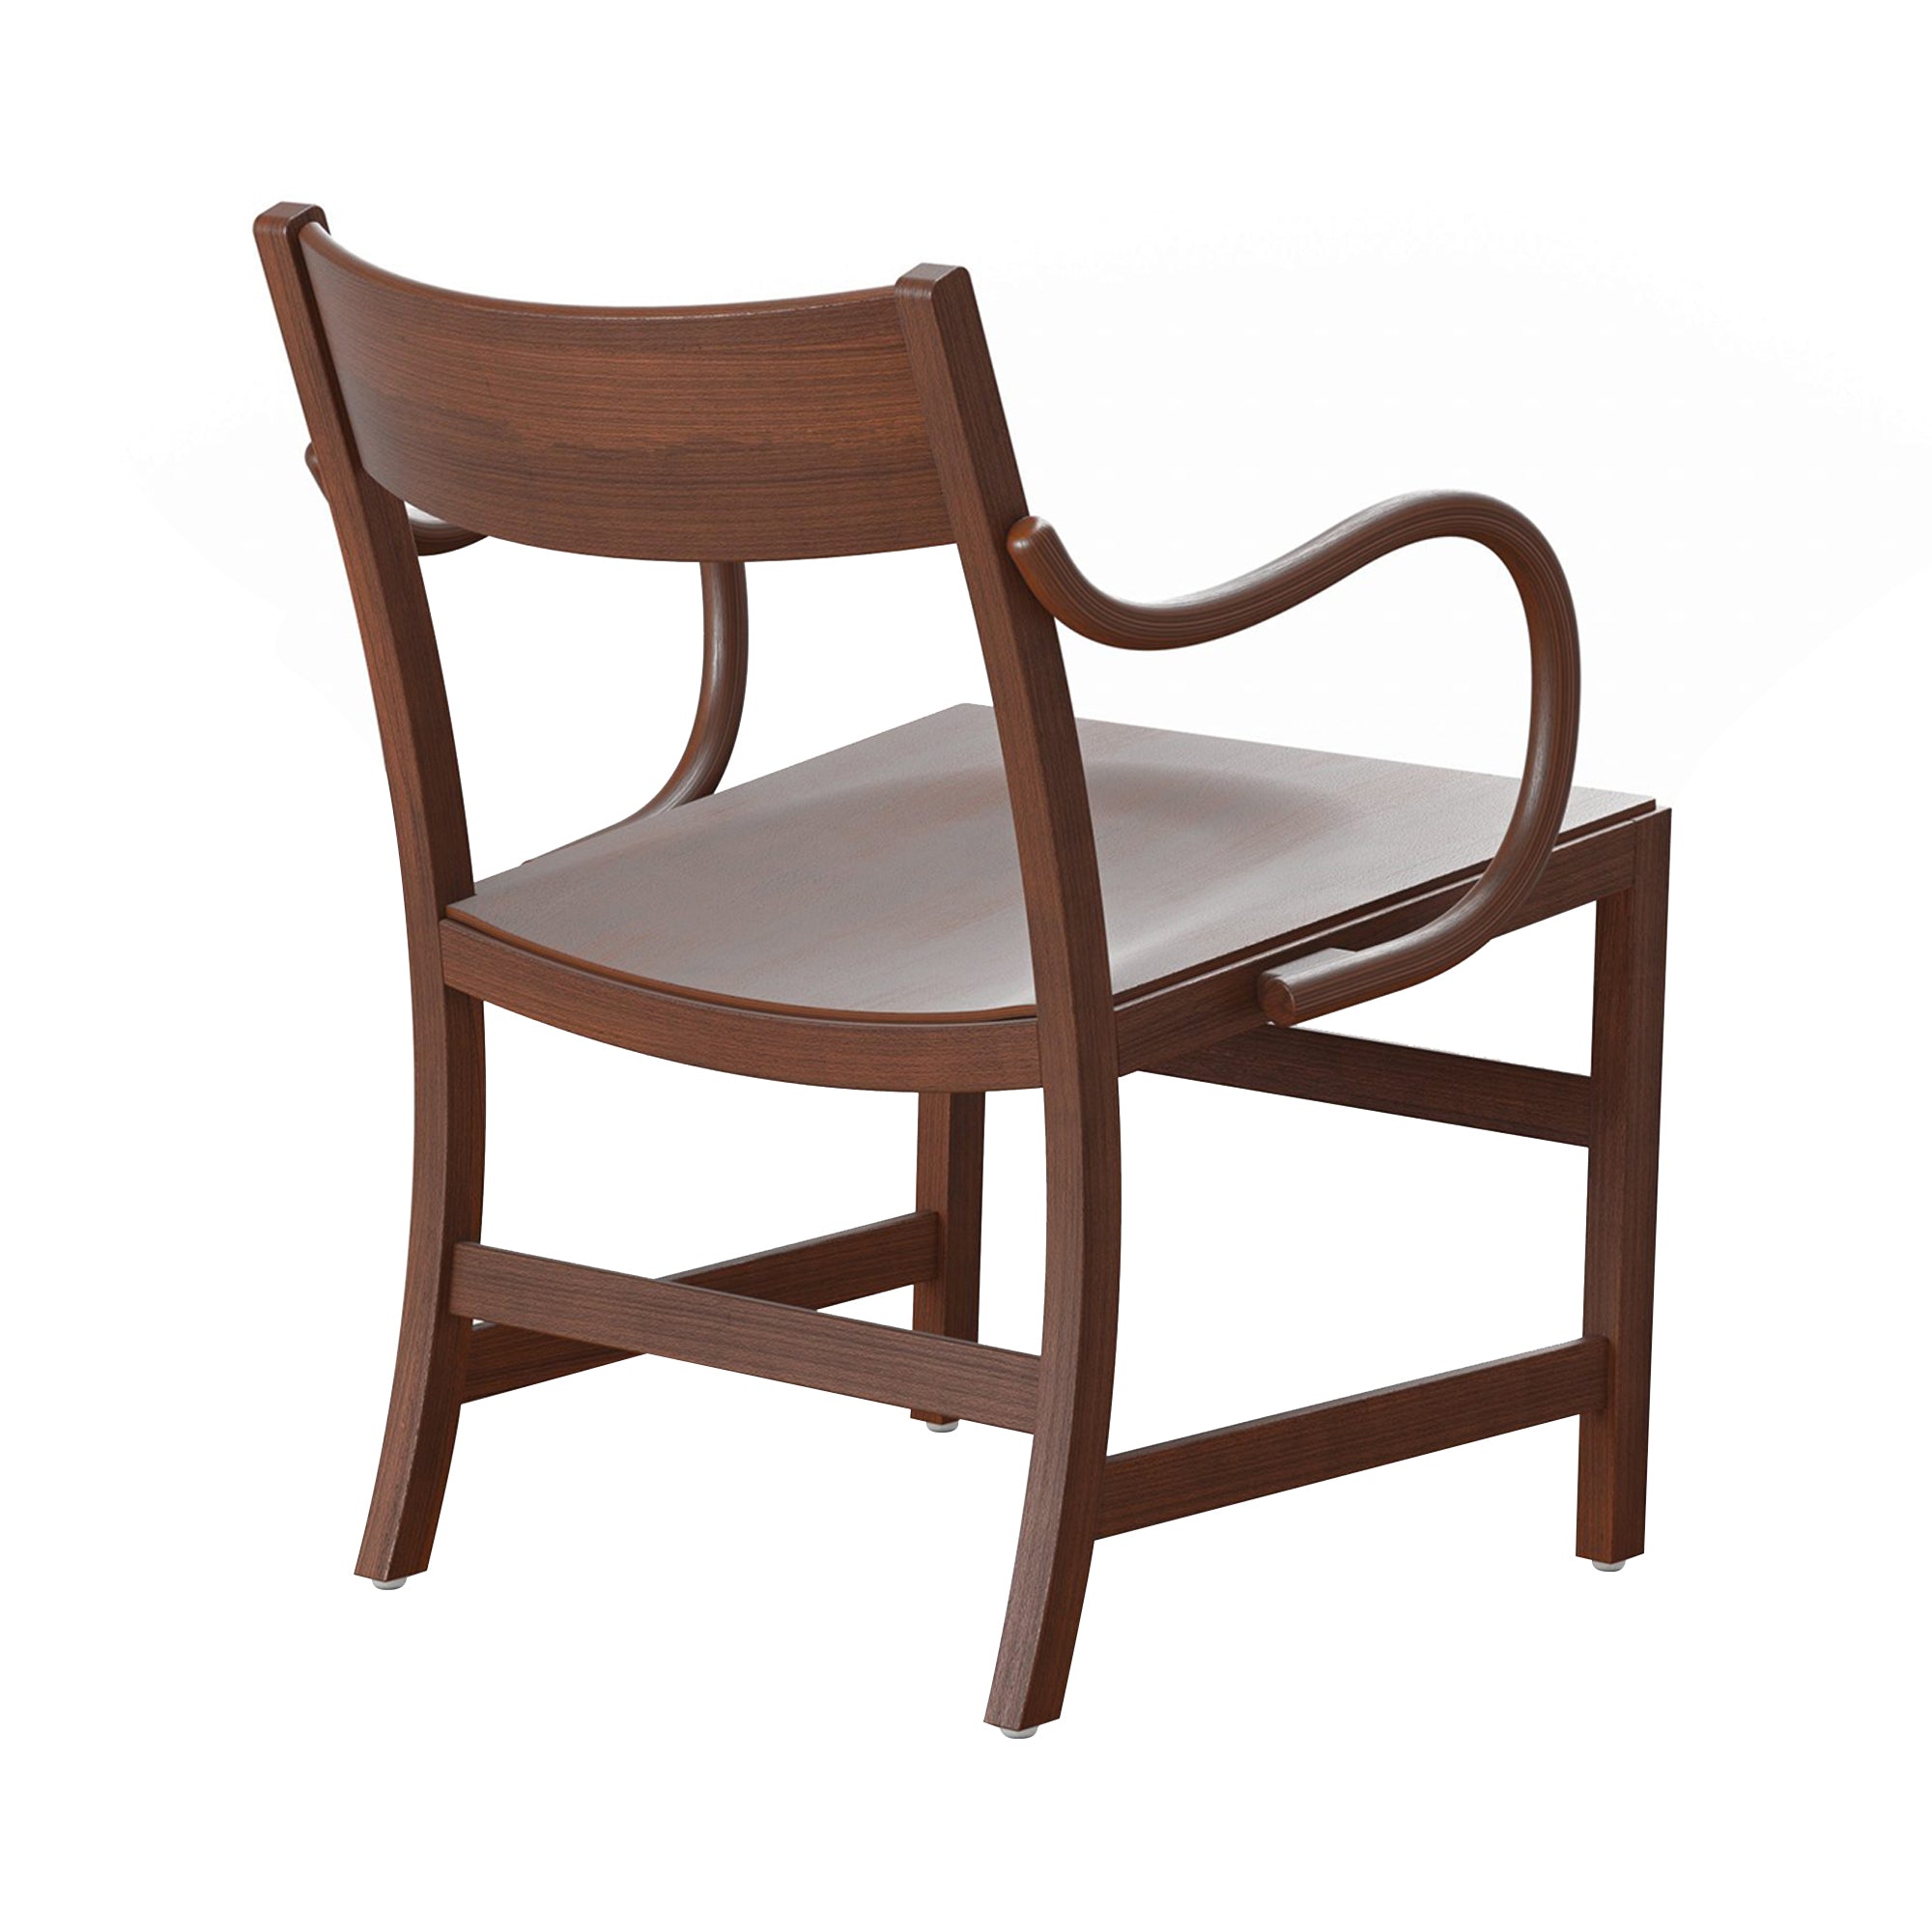 Waiter XL Easy Chair: Walnut Stained Beech